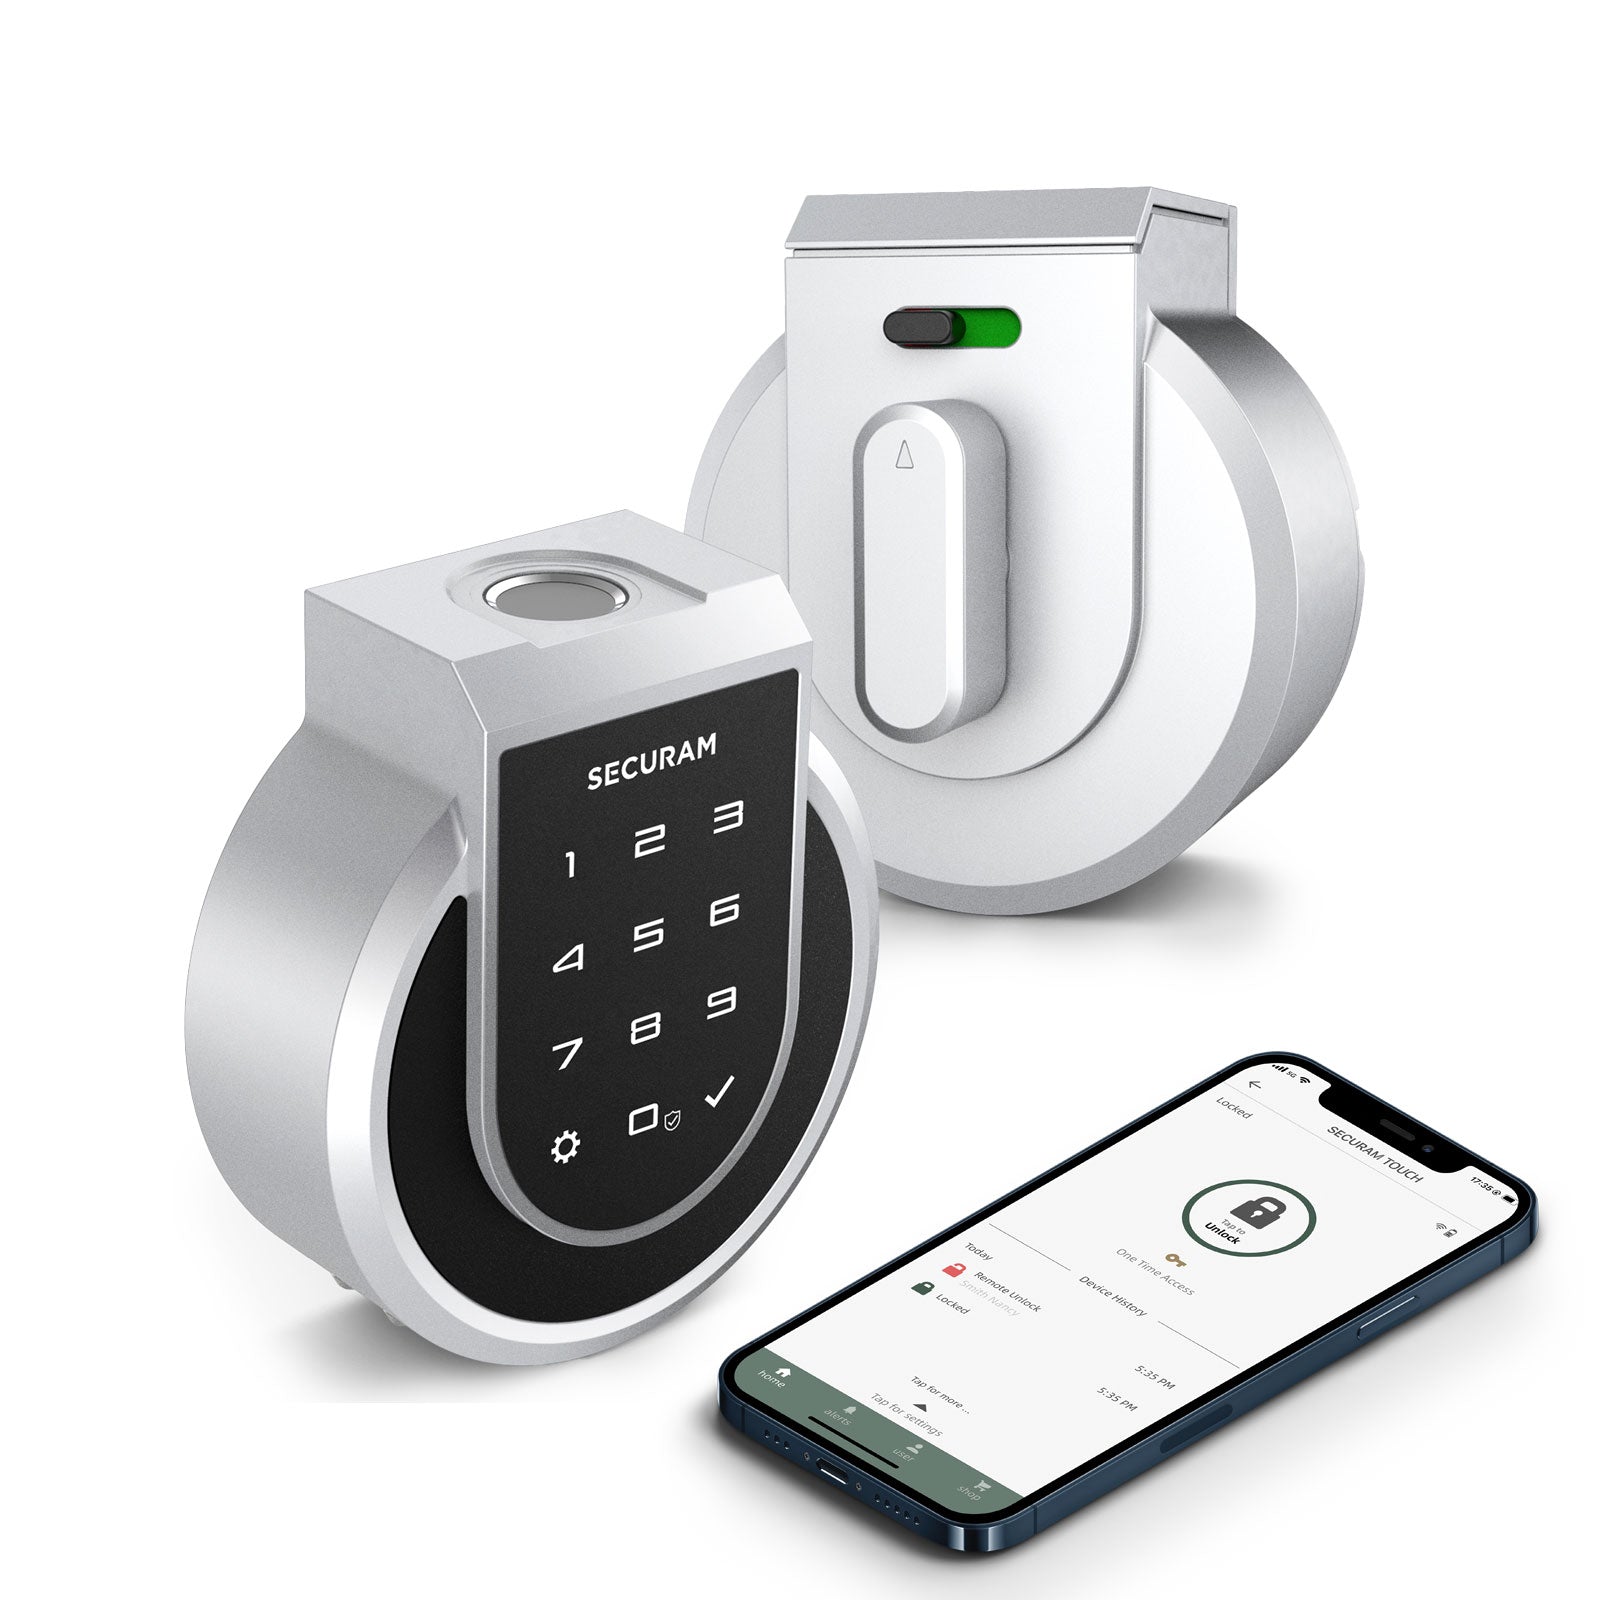 A SECURAM Touch - Fingerprint Smart Lock with a smart phone next to it.